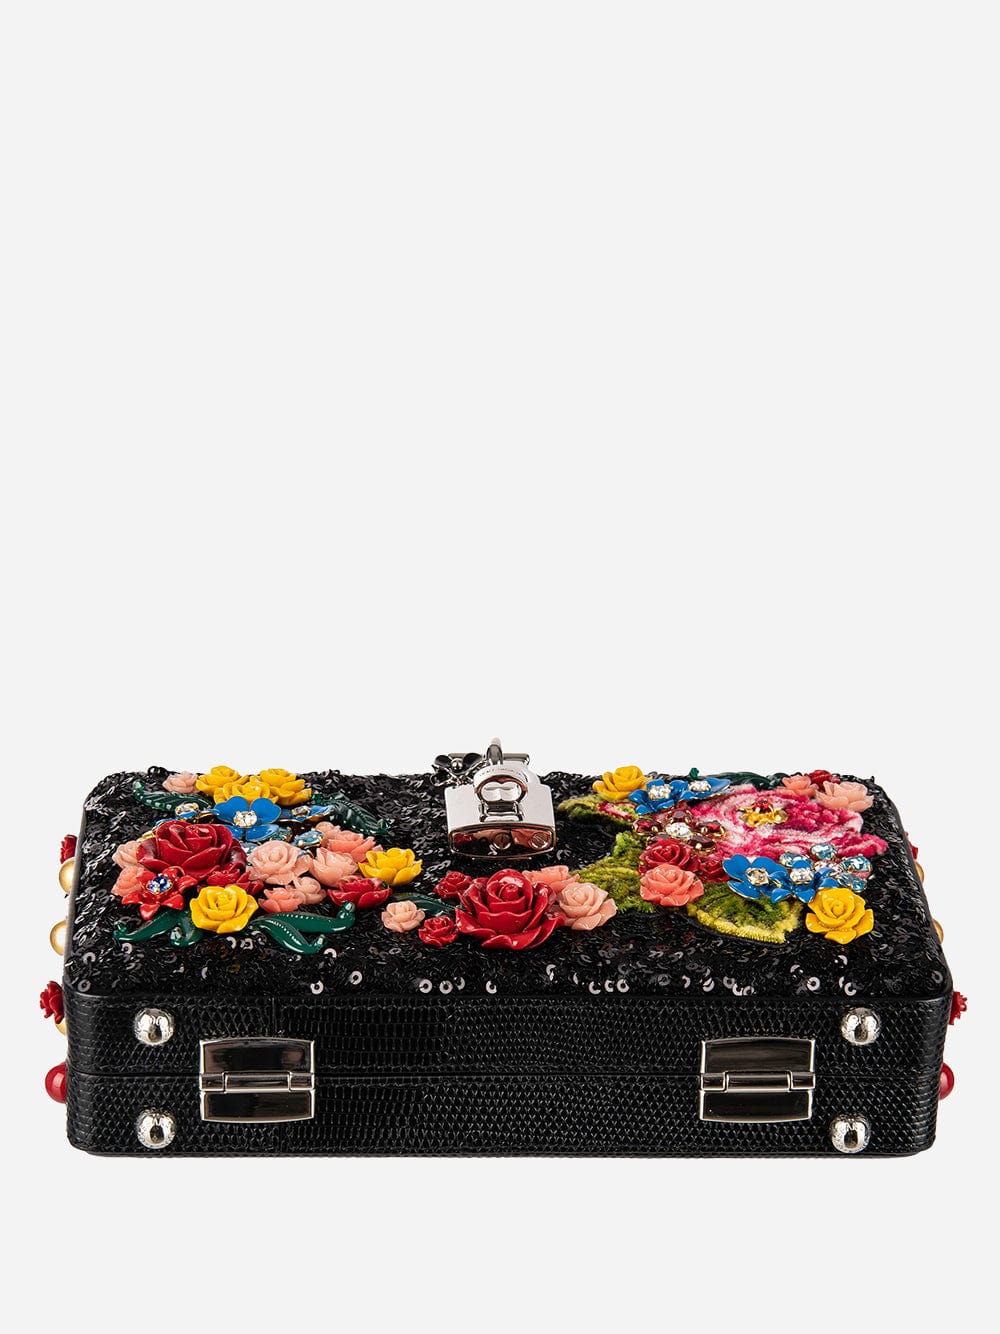 Dolce & Gabbana Sequined Floral Dolce Box